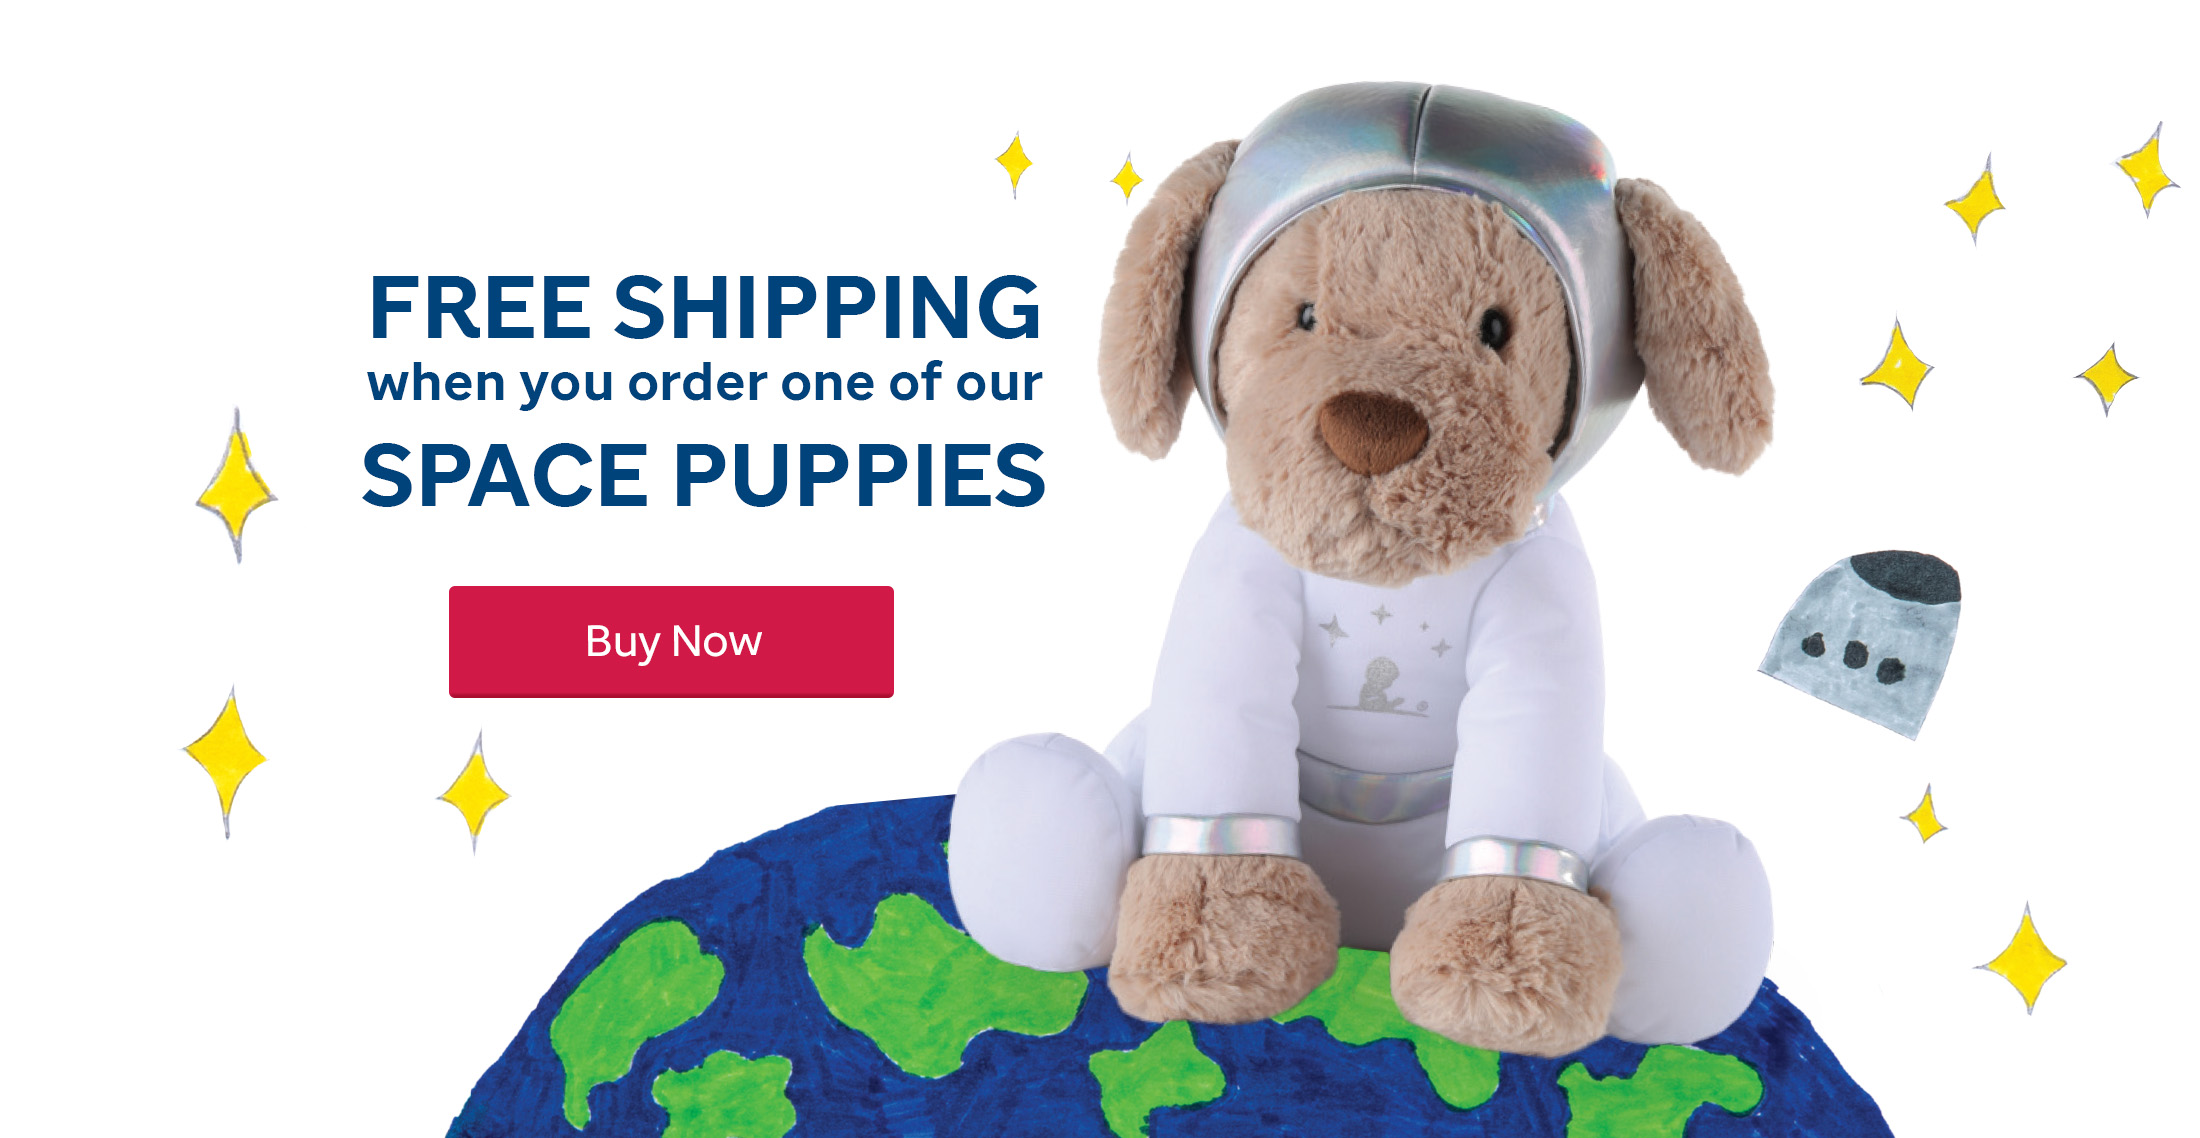 Free Shippping when you order a Space Puppy!